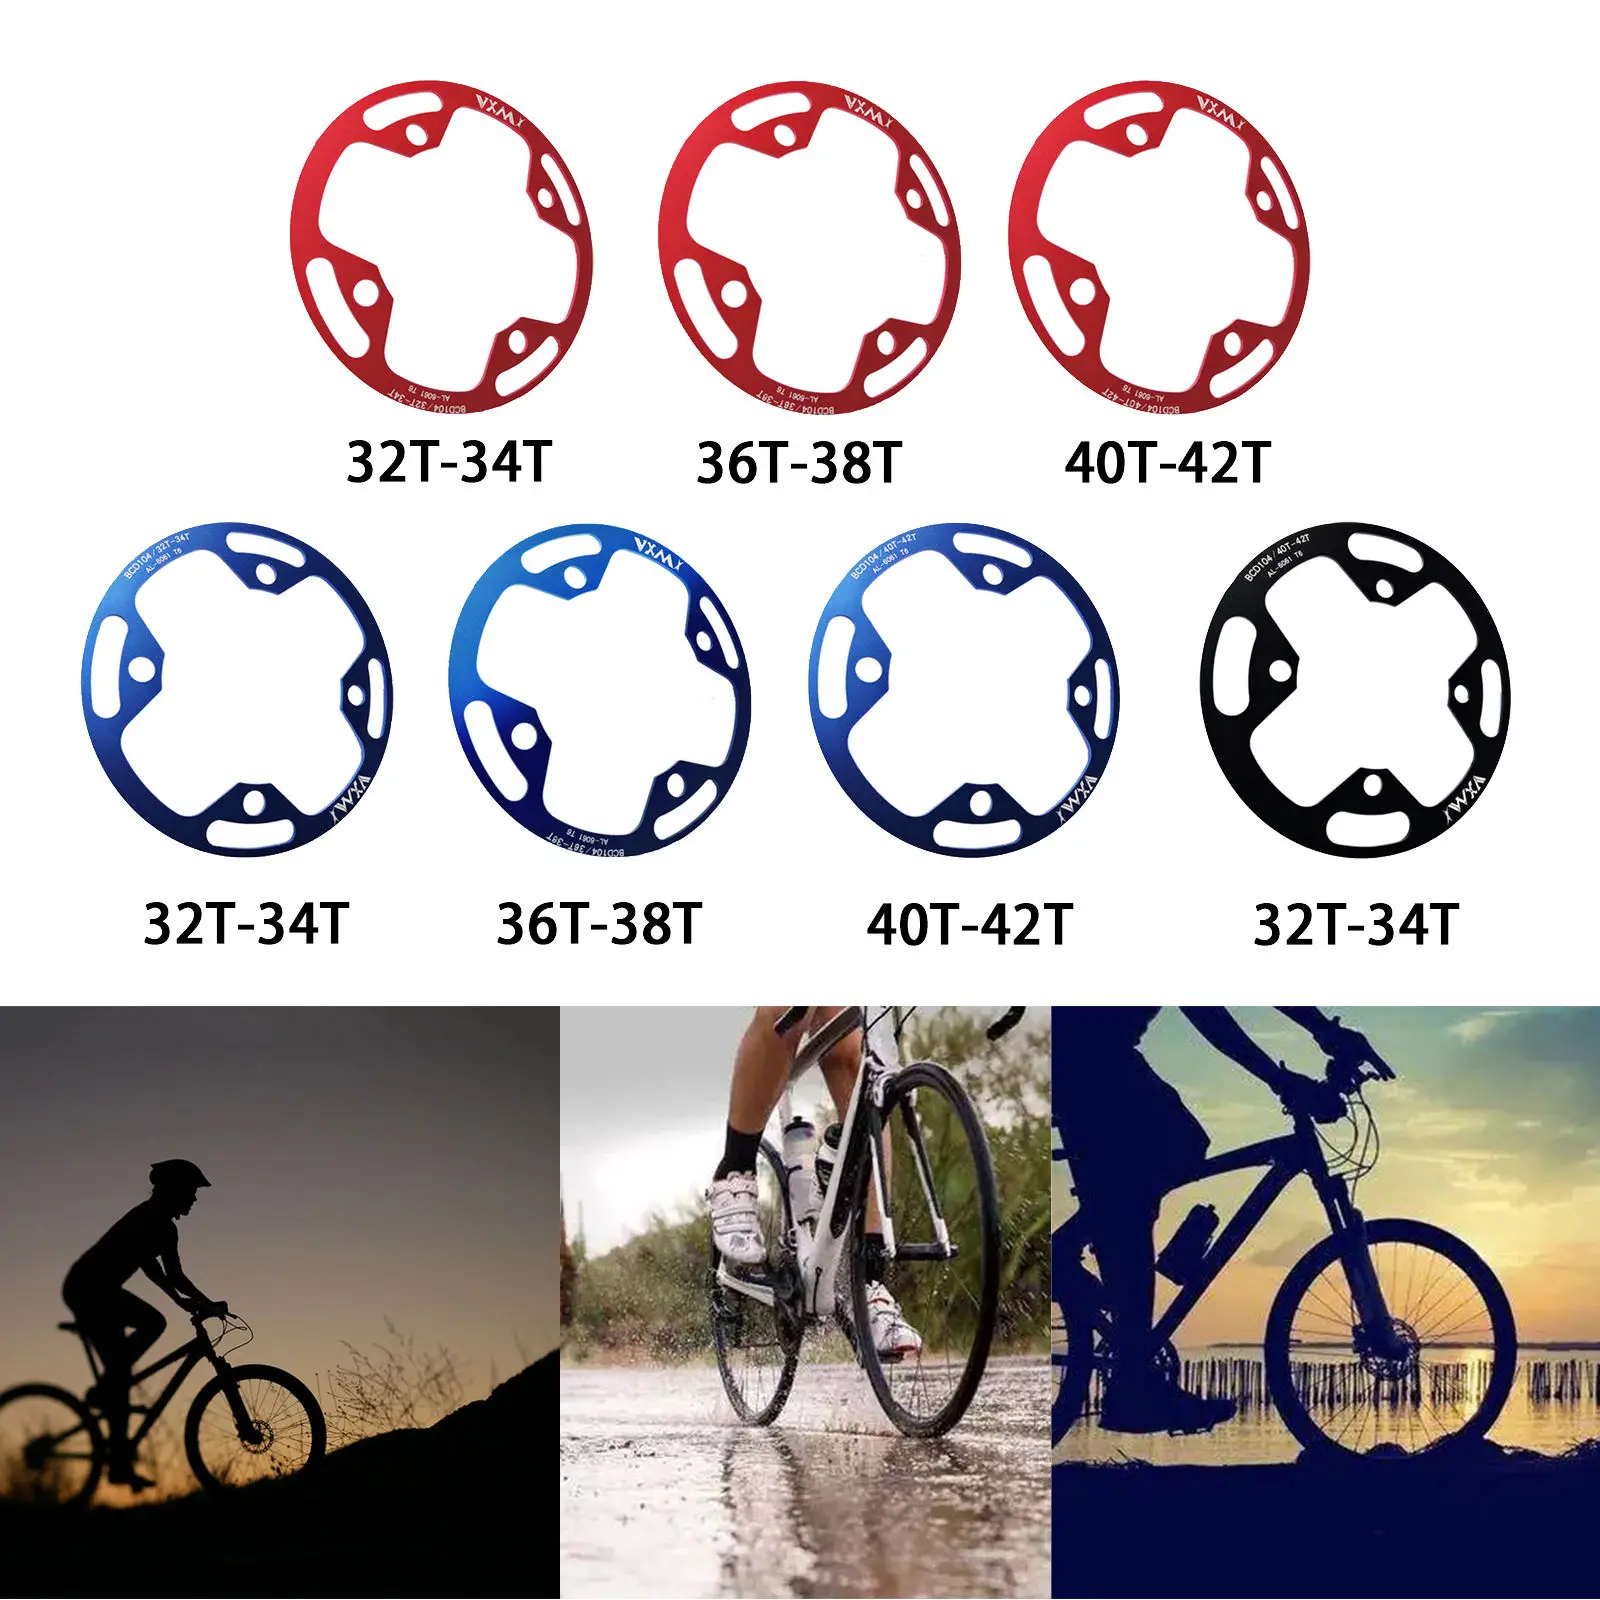 SYCOOVEN Mountain Bike Chainring Guard 104mm Aluminum Alloy Chain Ring Protector Cover for 30~42T Chainring Sprockets Black 